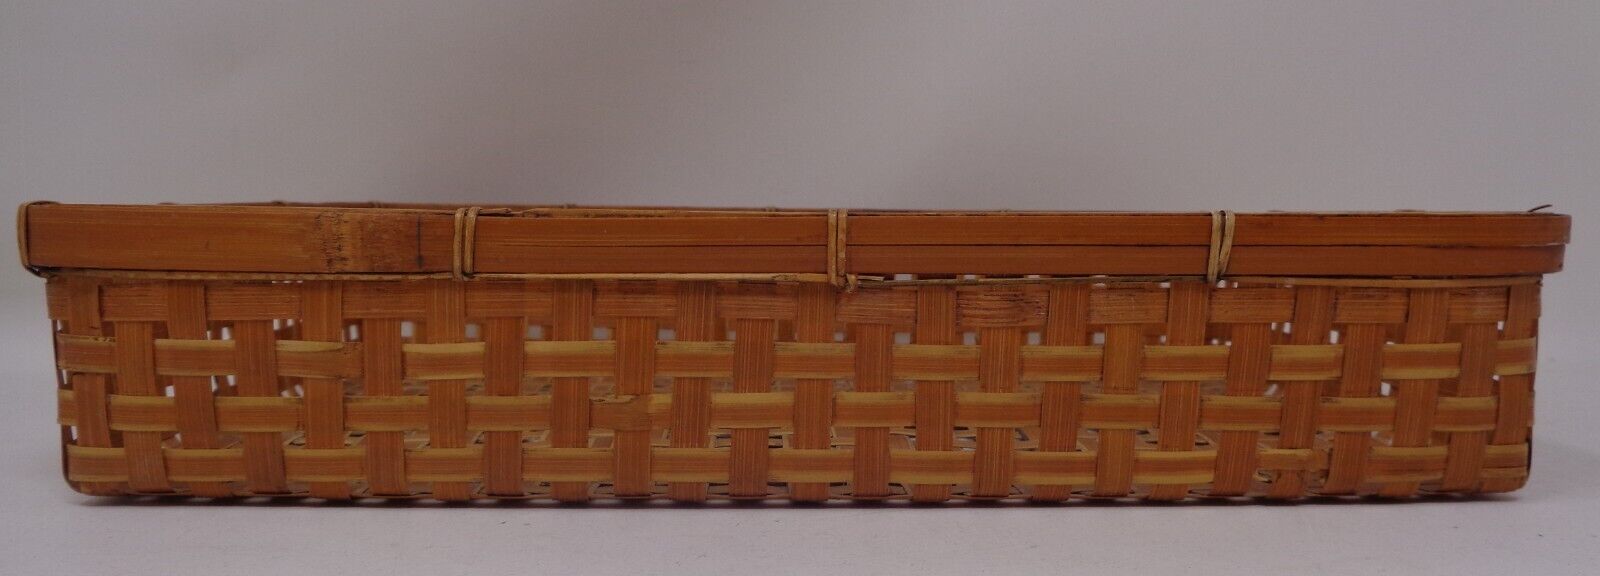 Handcrafted Tan Colored Rectangle 8x10 Basket